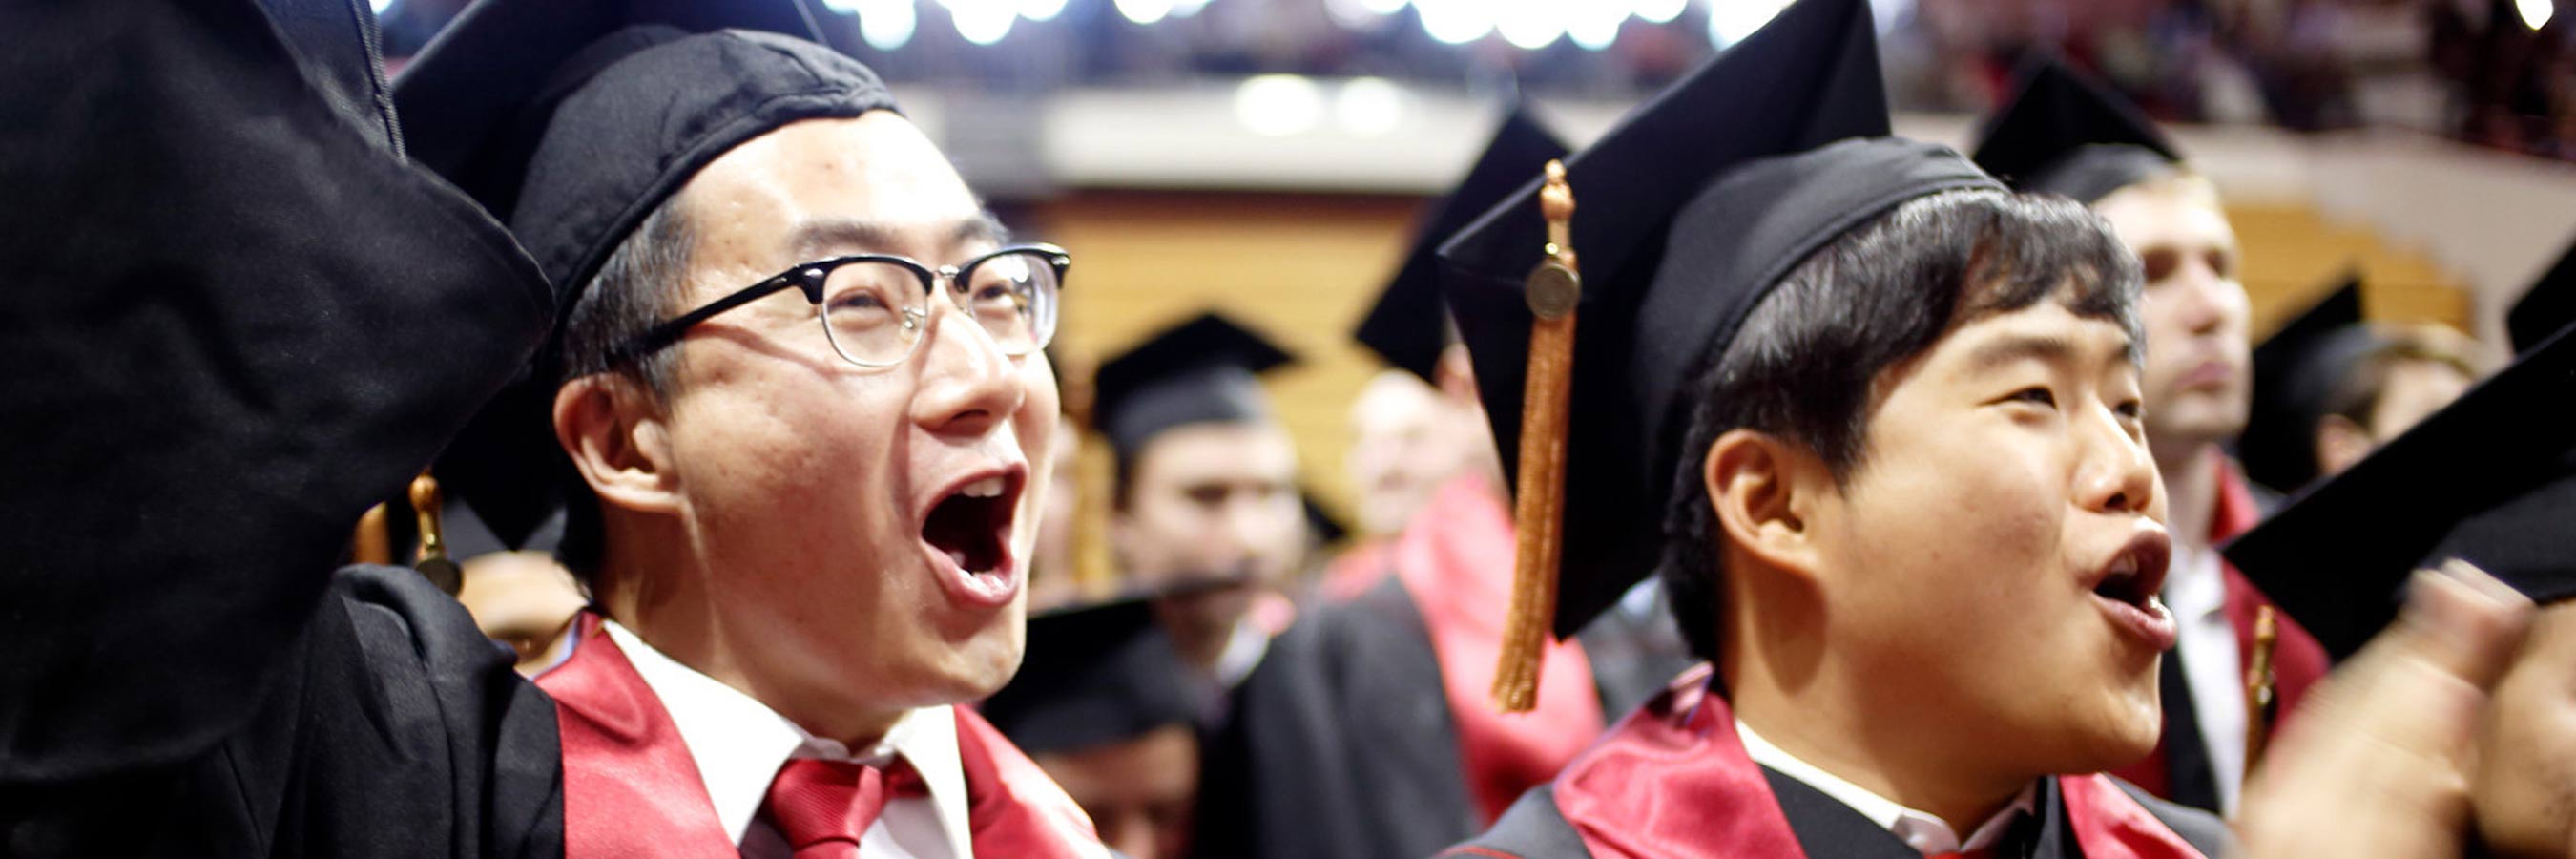 Two male students cheer uproariously at graduation